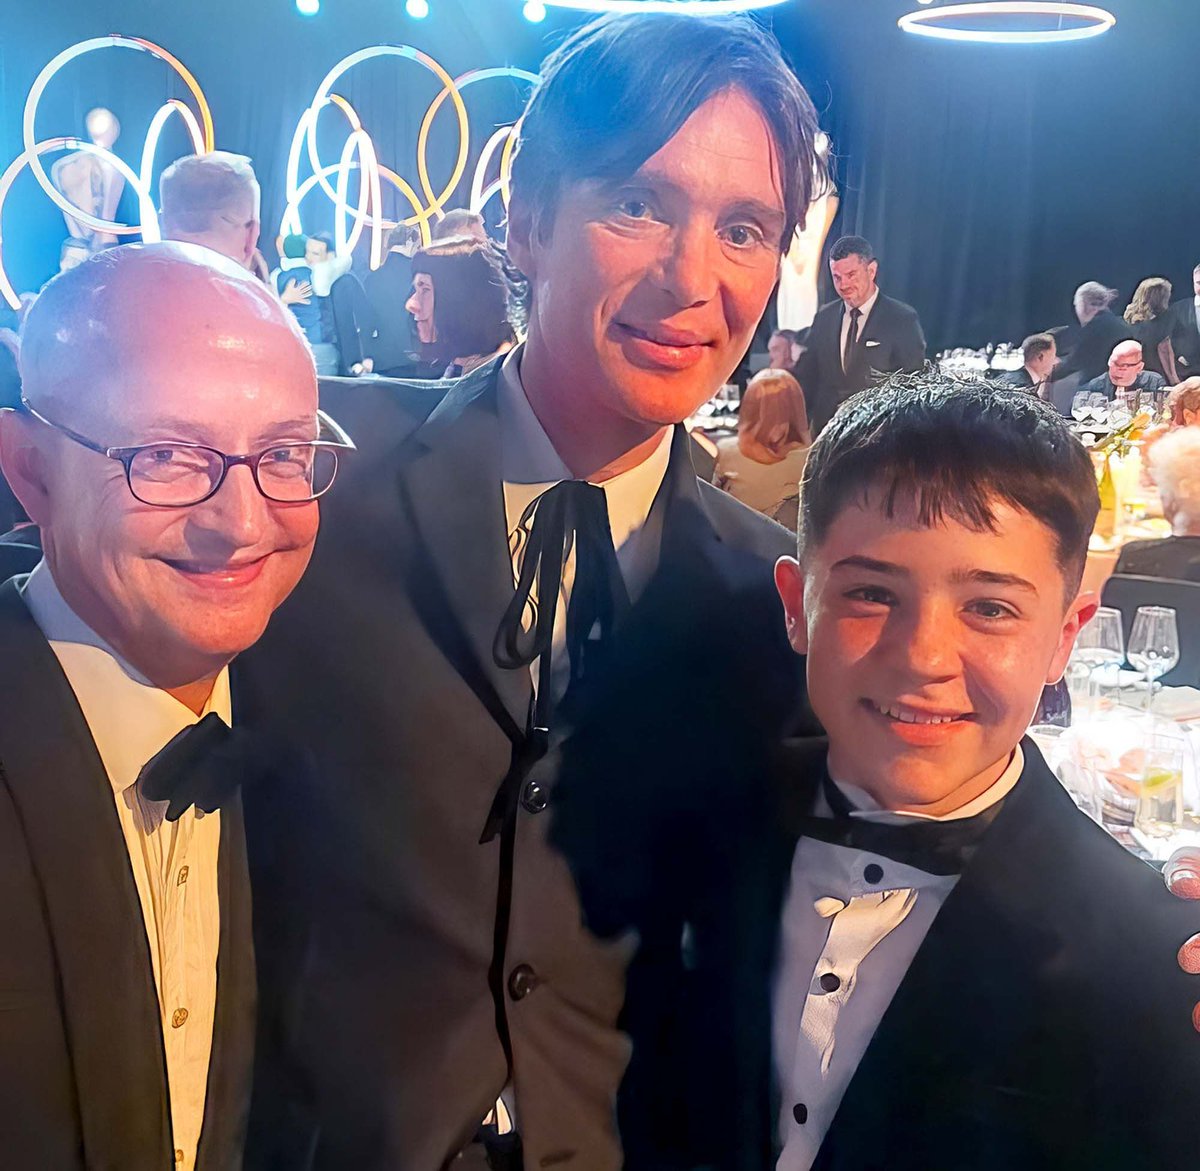 Rising star Ewan Morris had the time of his life at the Irish Film and Television Awards last weekend – the young Tralee actor even got a compliment from Oscar winner Cillian Murphy, who said the teen was great in his role in ‘Two for the Road’.